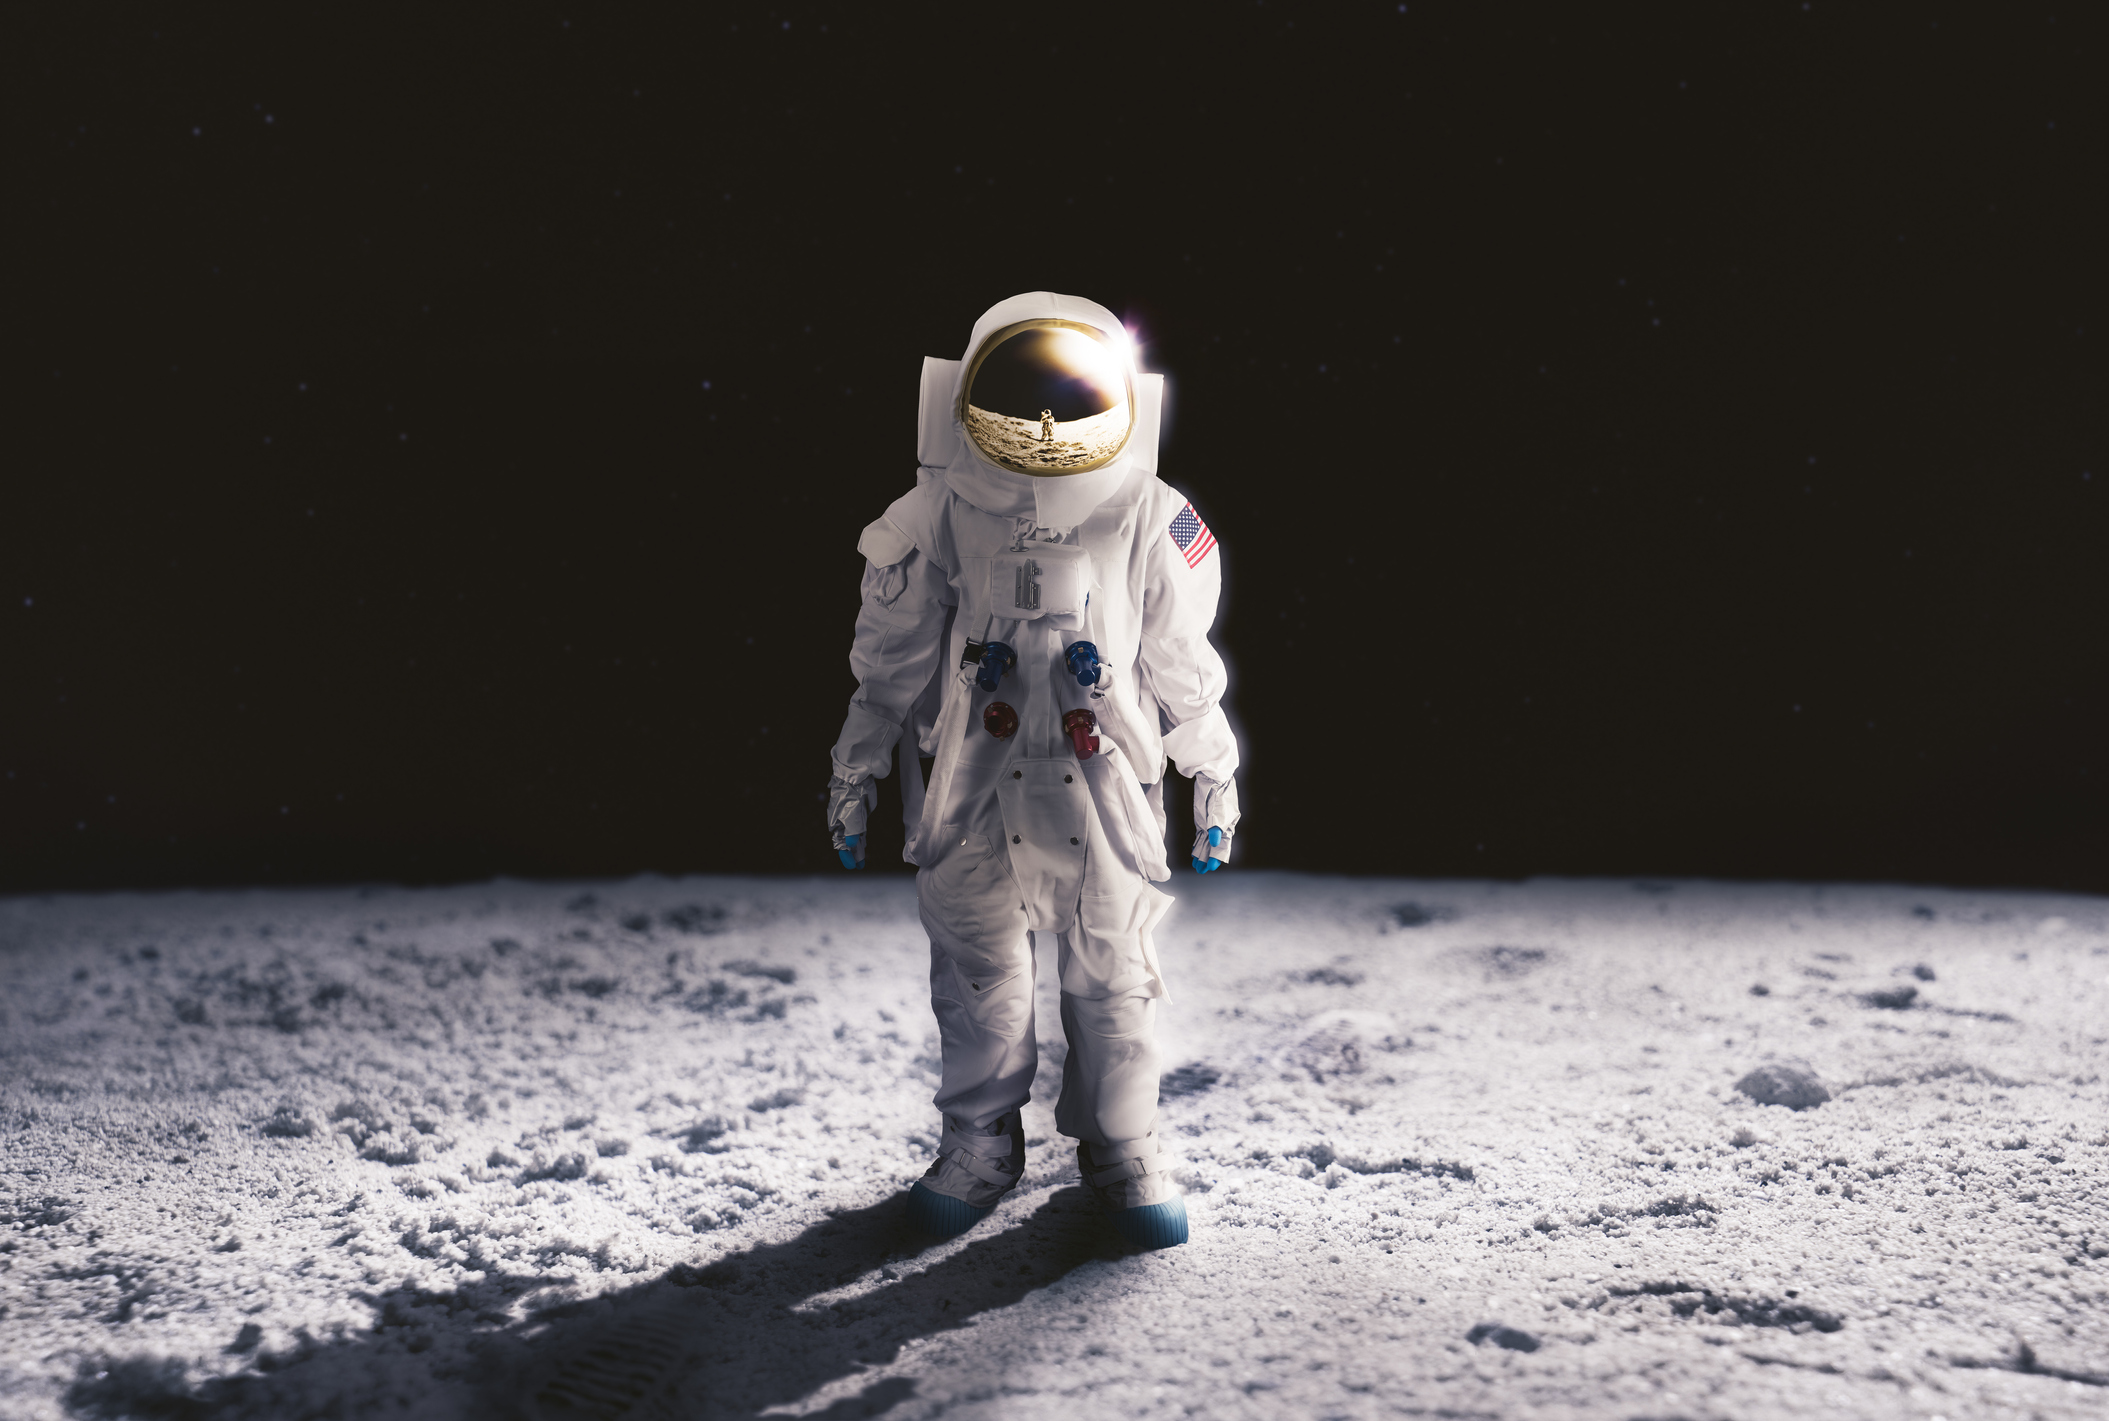 Image of astronaut on the moon